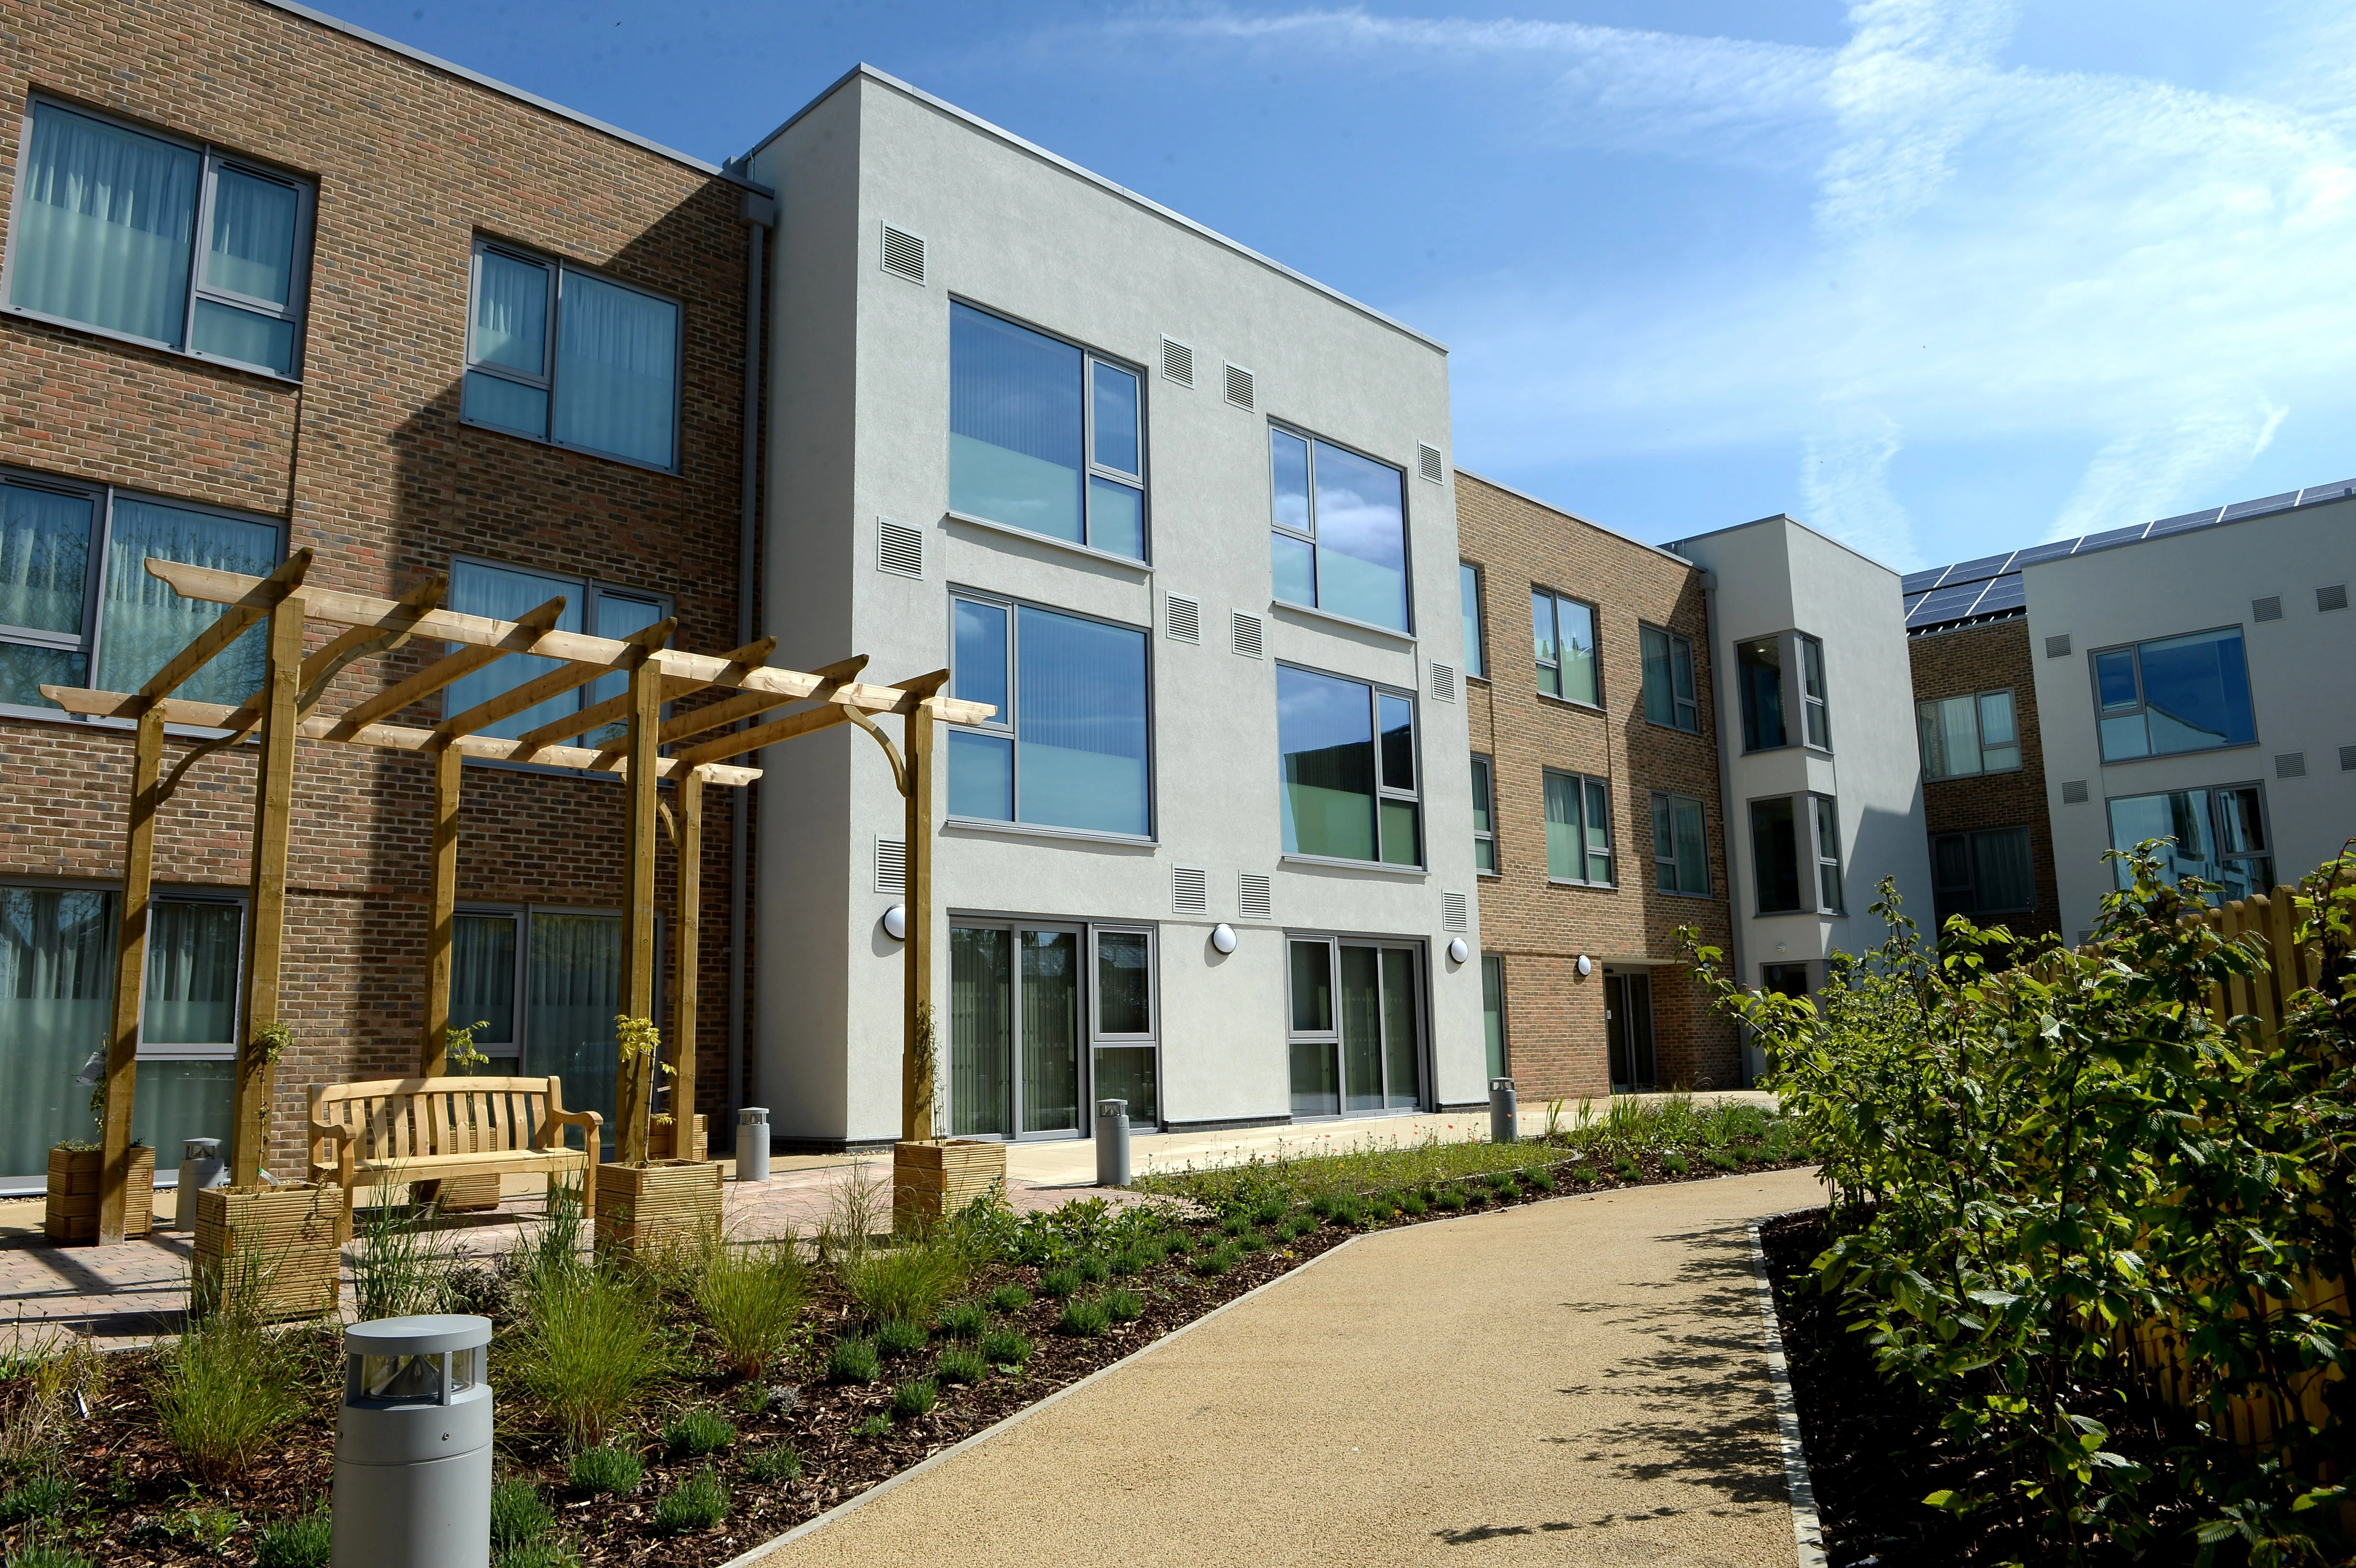 The new care home in Enfield.